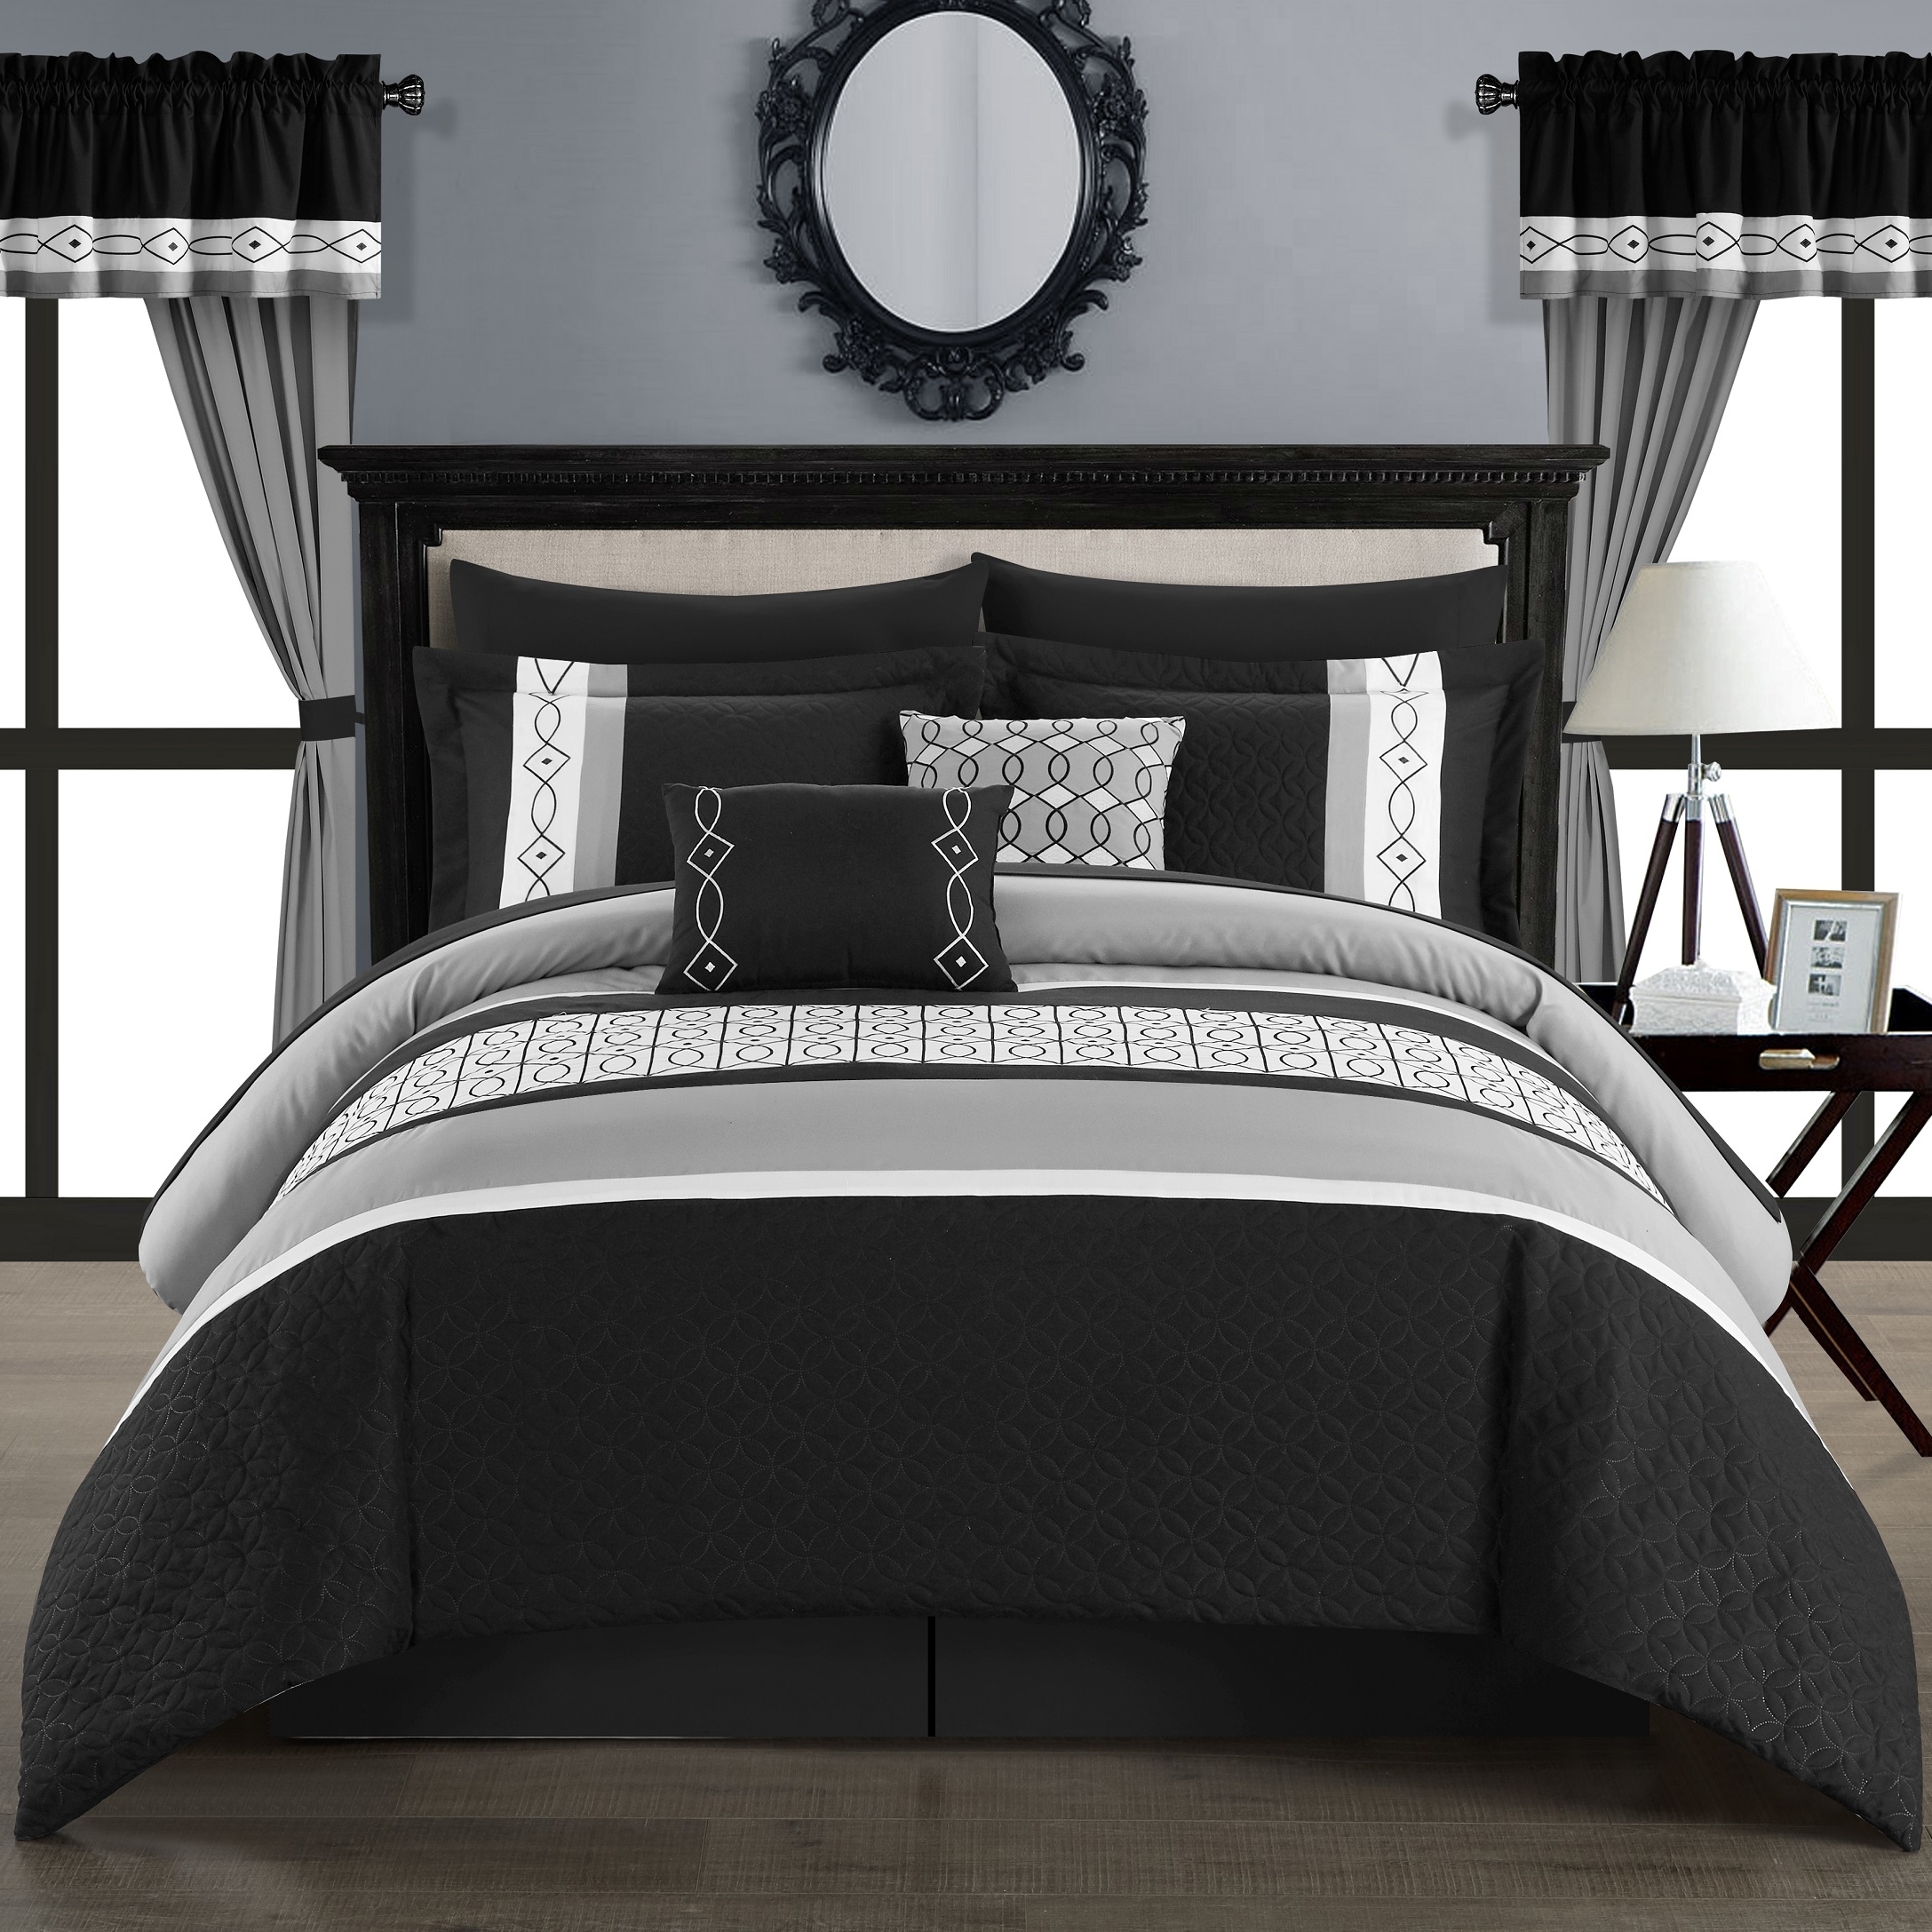 Katrein 20 Piece Comforter Set Color Block Geometric Embroidered Bed In A Bag Bedding - Black, Queen